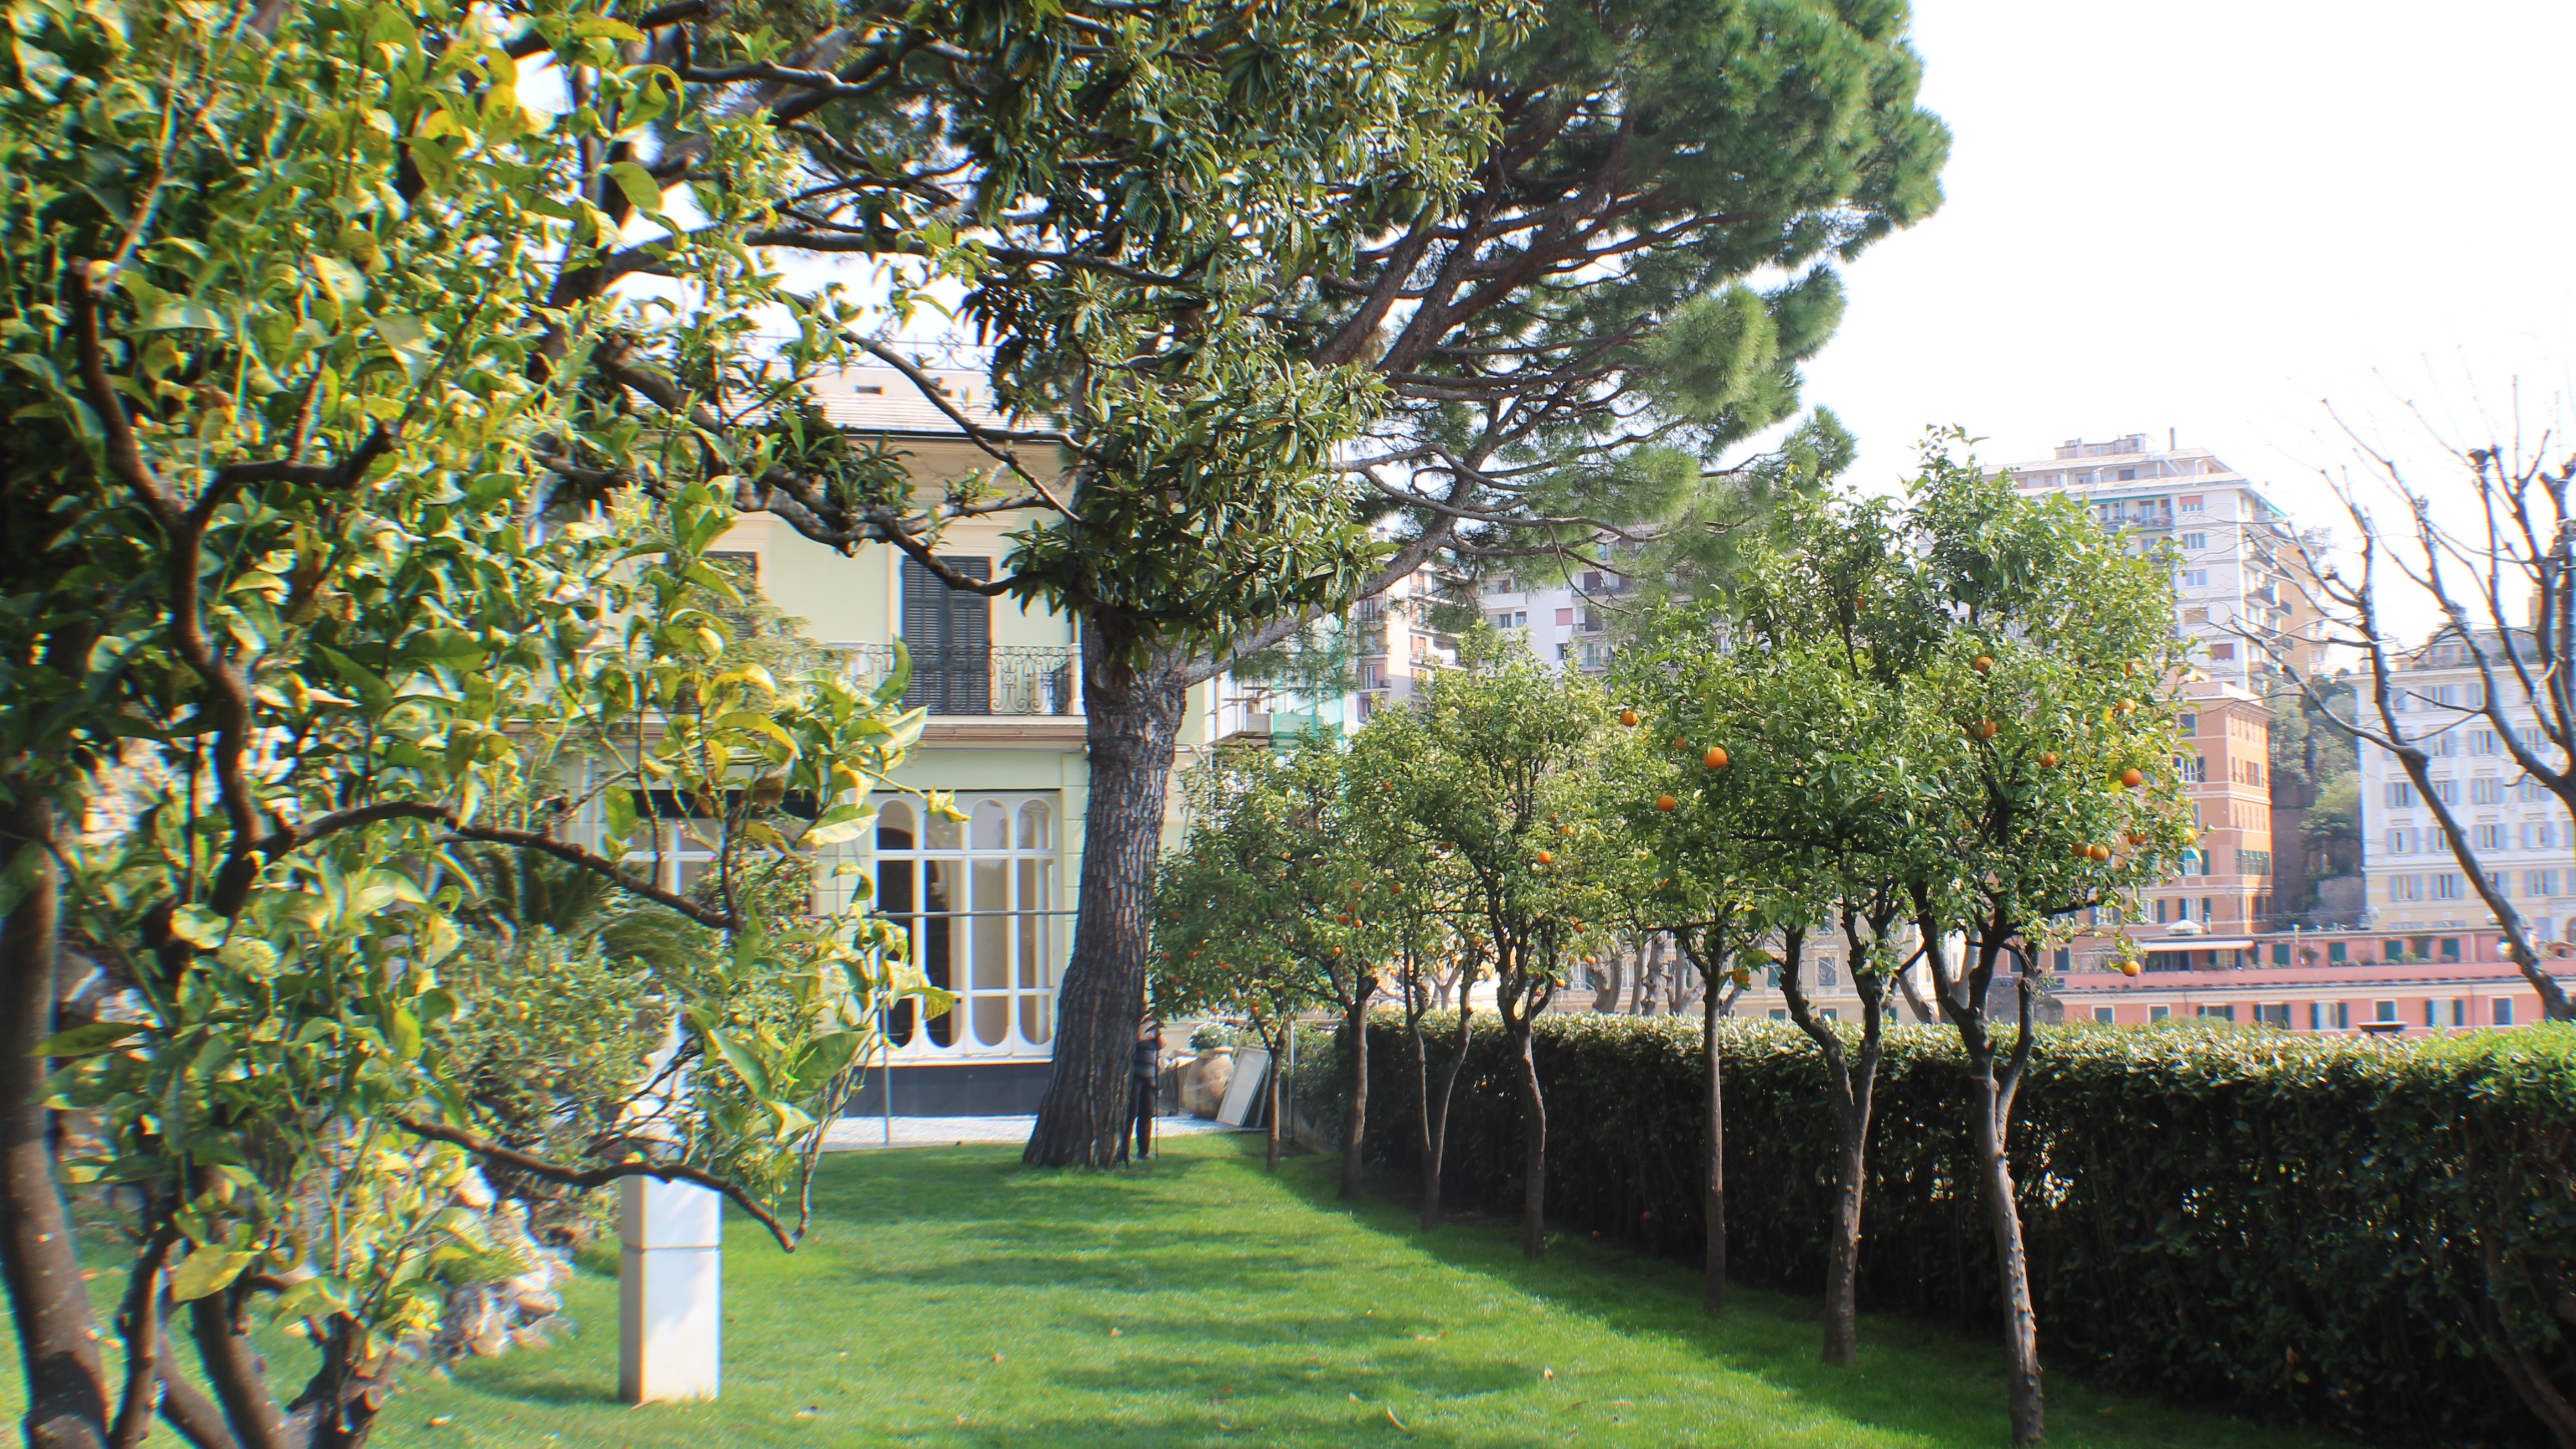 an italian villa sits behind green trees in a lush garden. The skyline of Genoa's colorful buildings can be seen over a hedge.